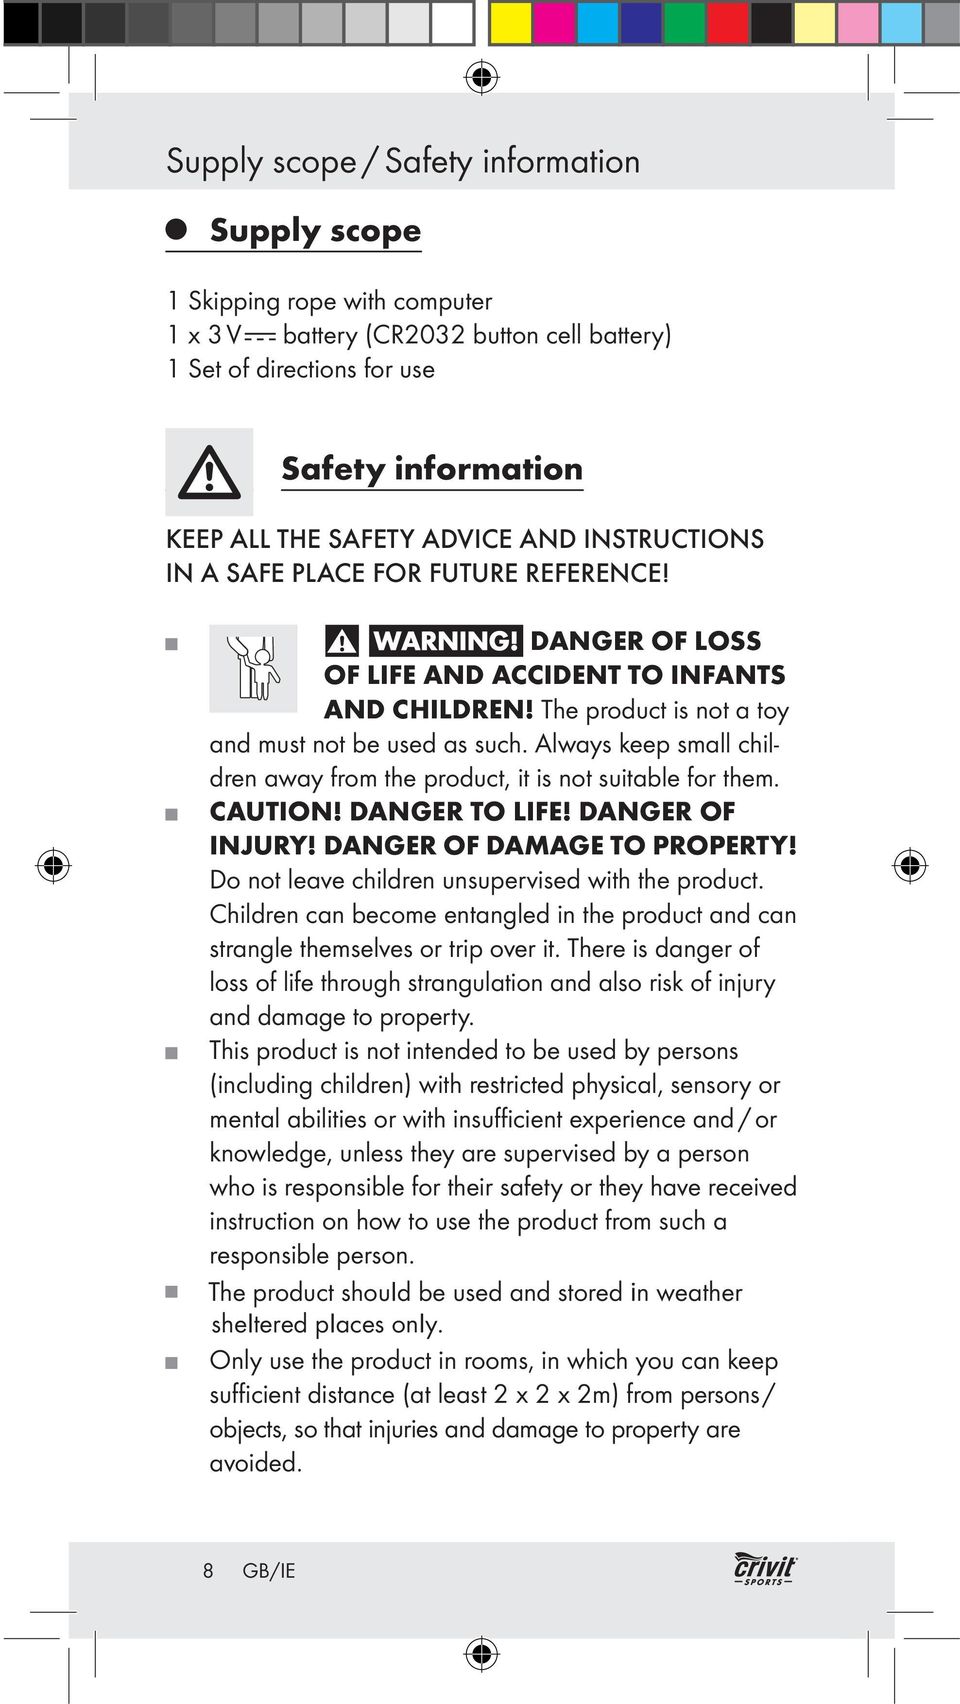 Always keep small children away from the product, it is not suitable for them. CAUTION! DANGER TO LIFE! DANGER OF INJURY! DANGER OF DAMAGE TO PROPERTY!